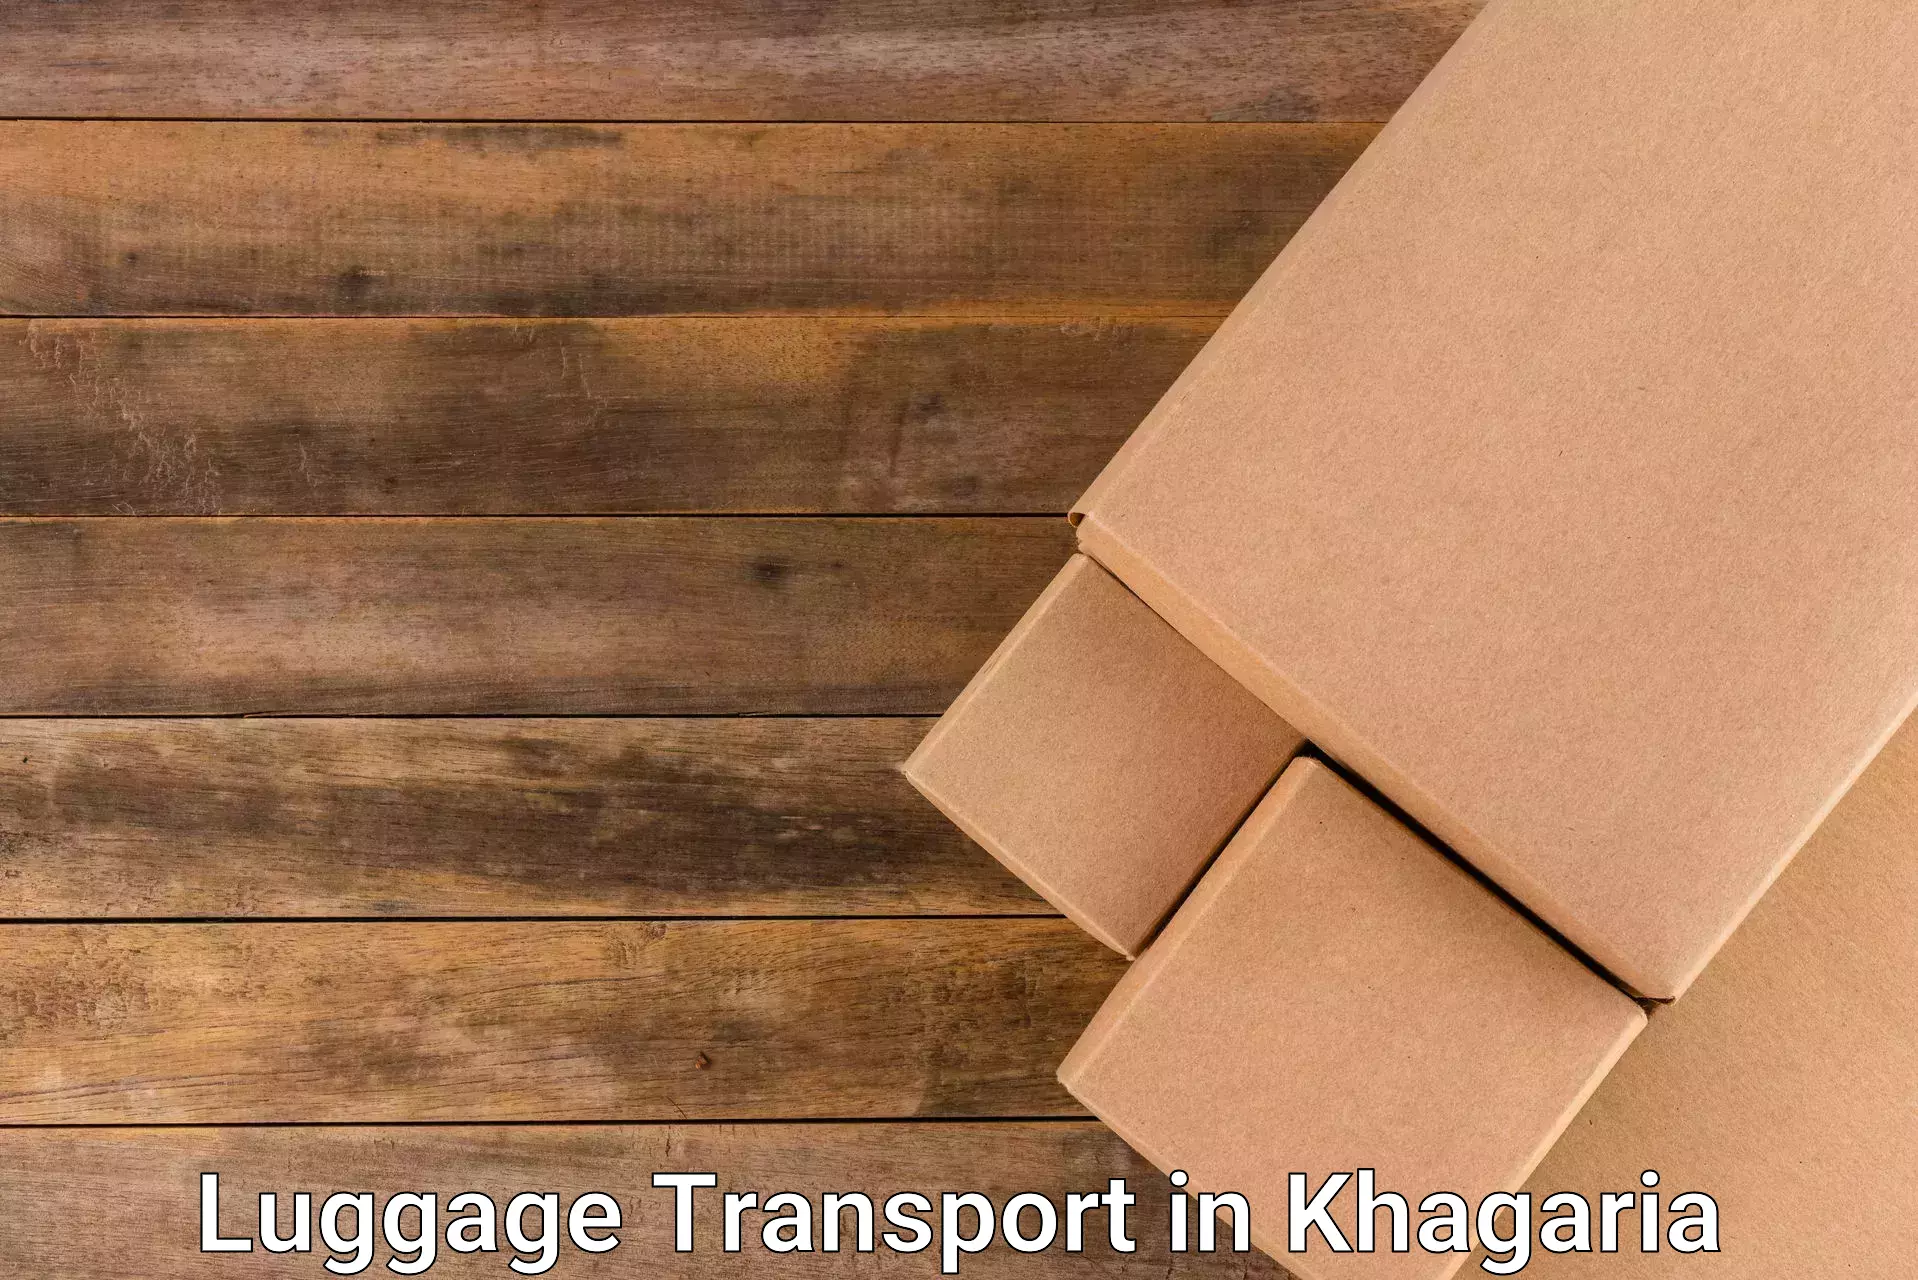 Luggage storage and delivery in Khagaria